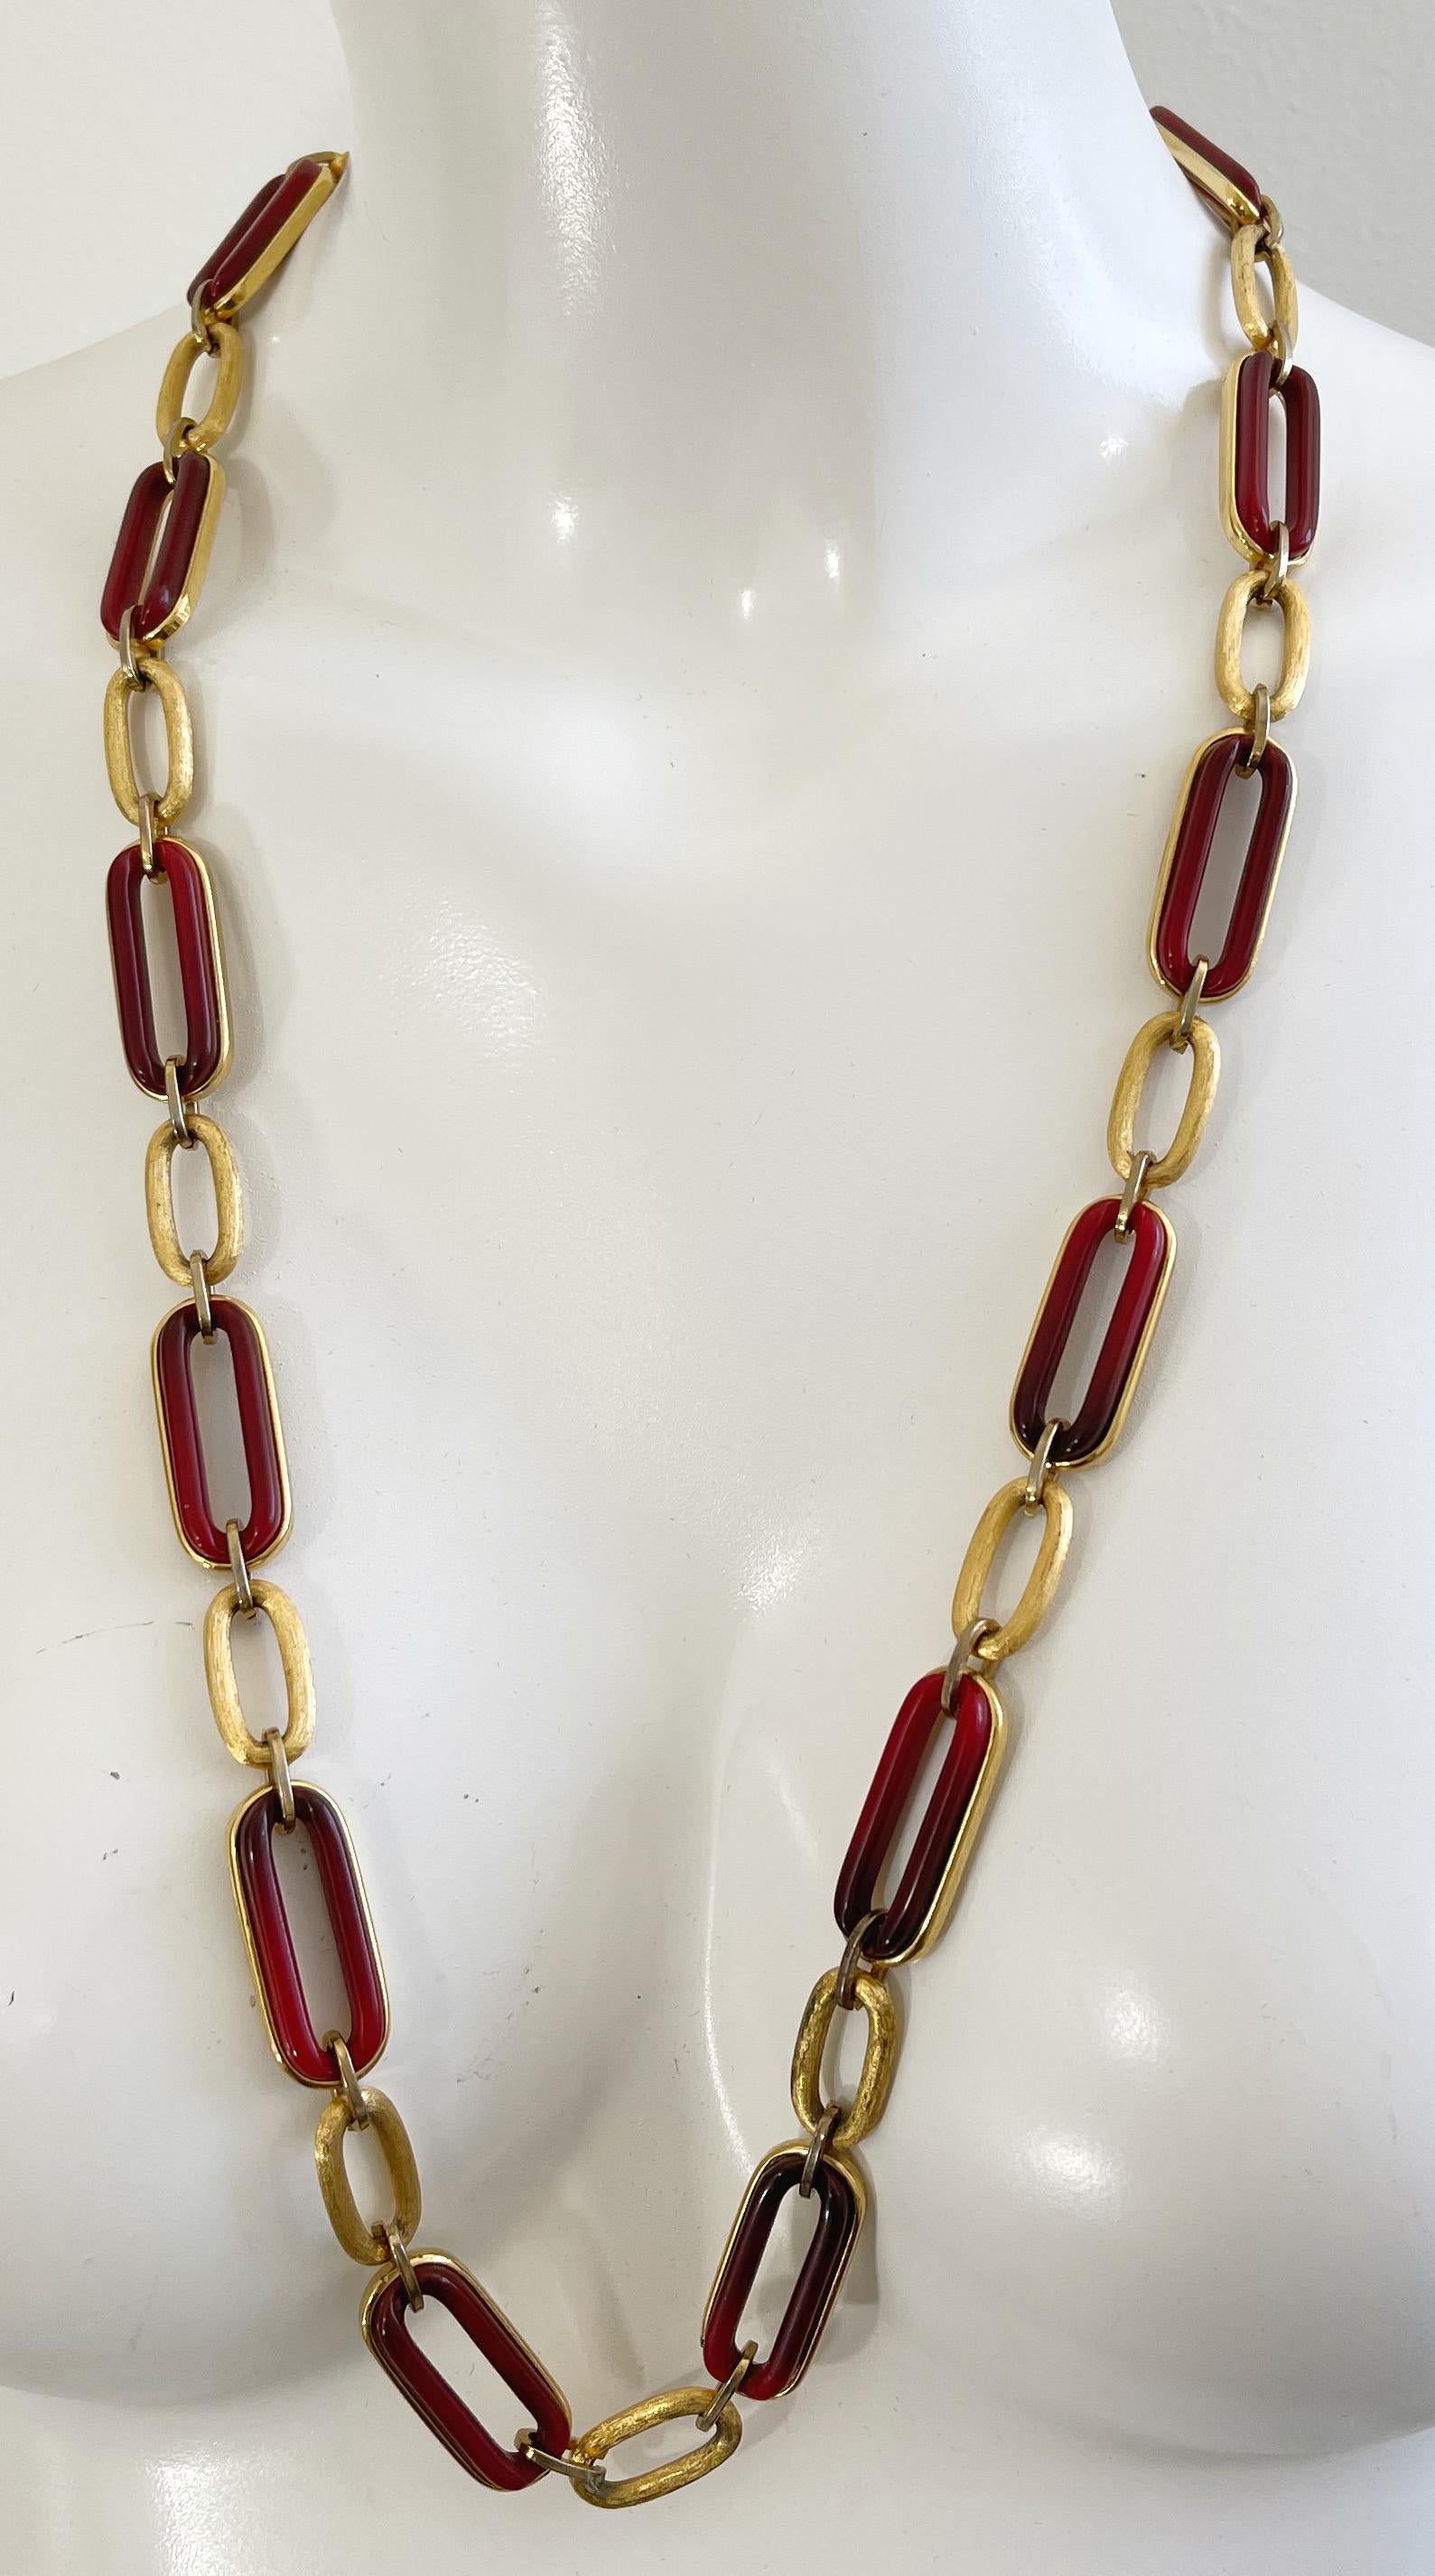 Beautiful vintage 1970s GIVENCHY amber and gold long chain necklace or belt ! Features GG clasp closure. Looks great as a long necklace or wrapped around as a choker. Can also be worn as a belt. The pictured large pendant necklace with amber and